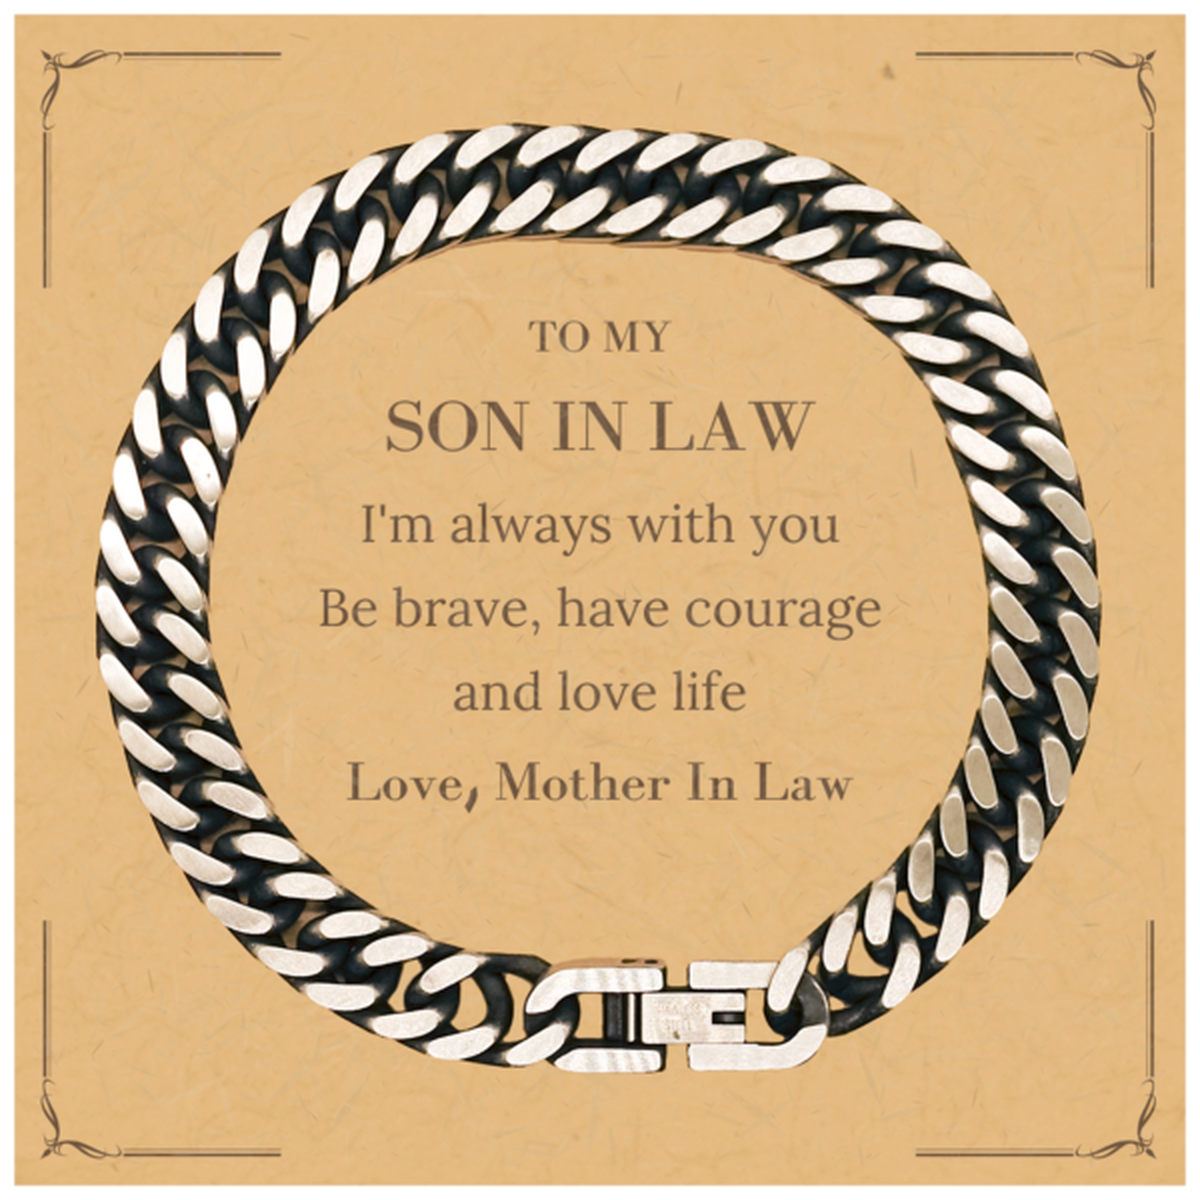 To My Son In Law Gifts from Mother In Law, Unique Cuban Link Chain Bracelet Inspirational Christmas Birthday Graduation Gifts for Son In Law I'm always with you. Be brave, have courage and love life. Love, Mother In Law